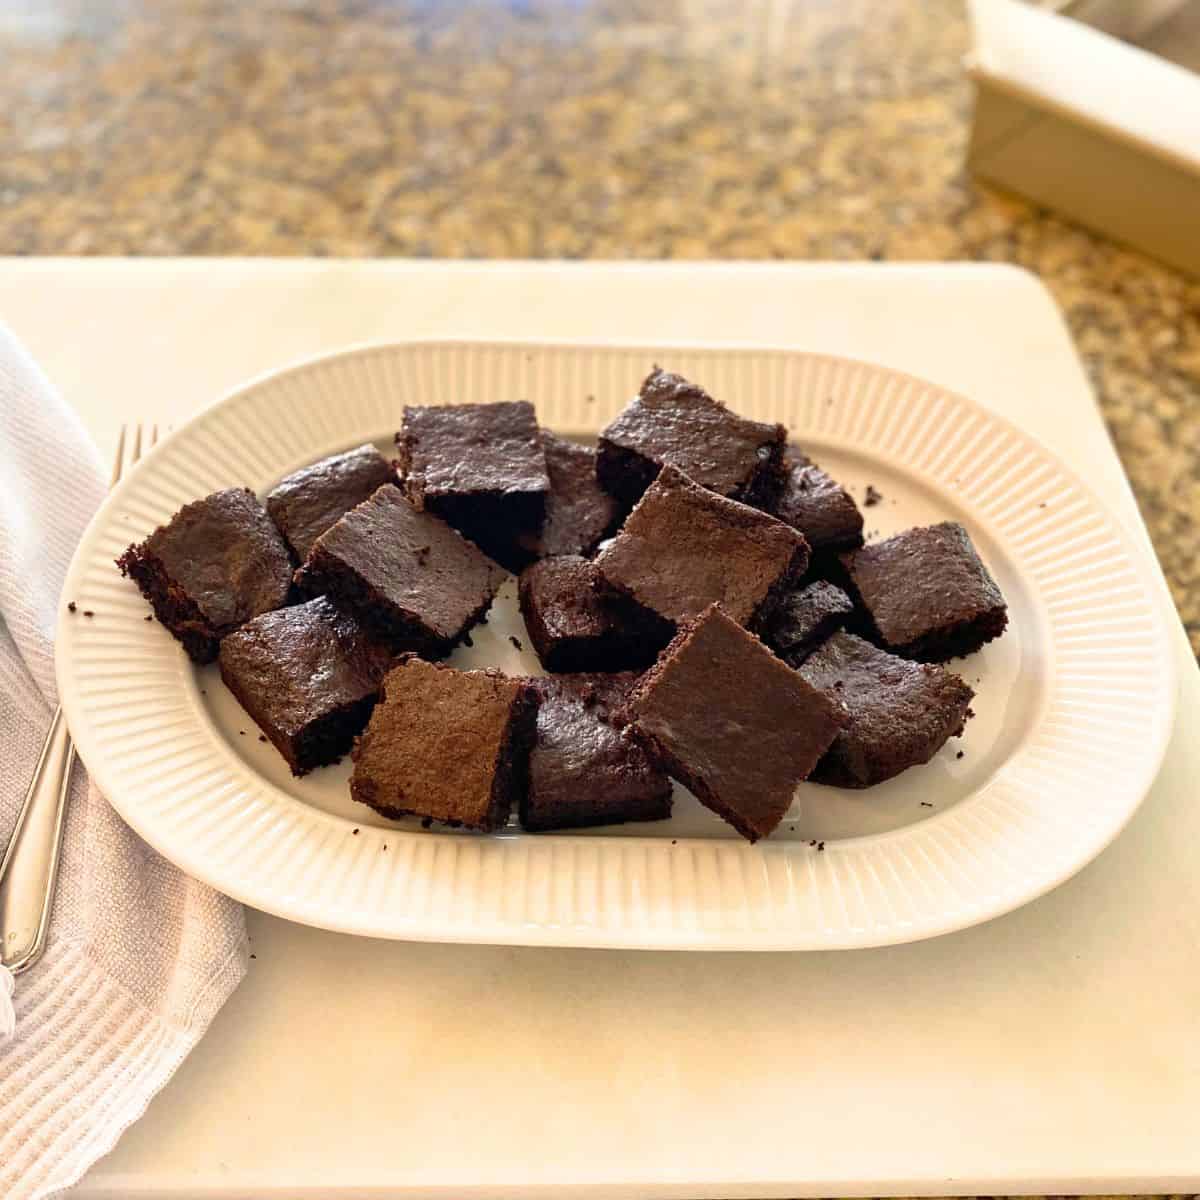 Baked brownies cut into squares stacked on a fluted white porcelain serving platter with a fork next to them